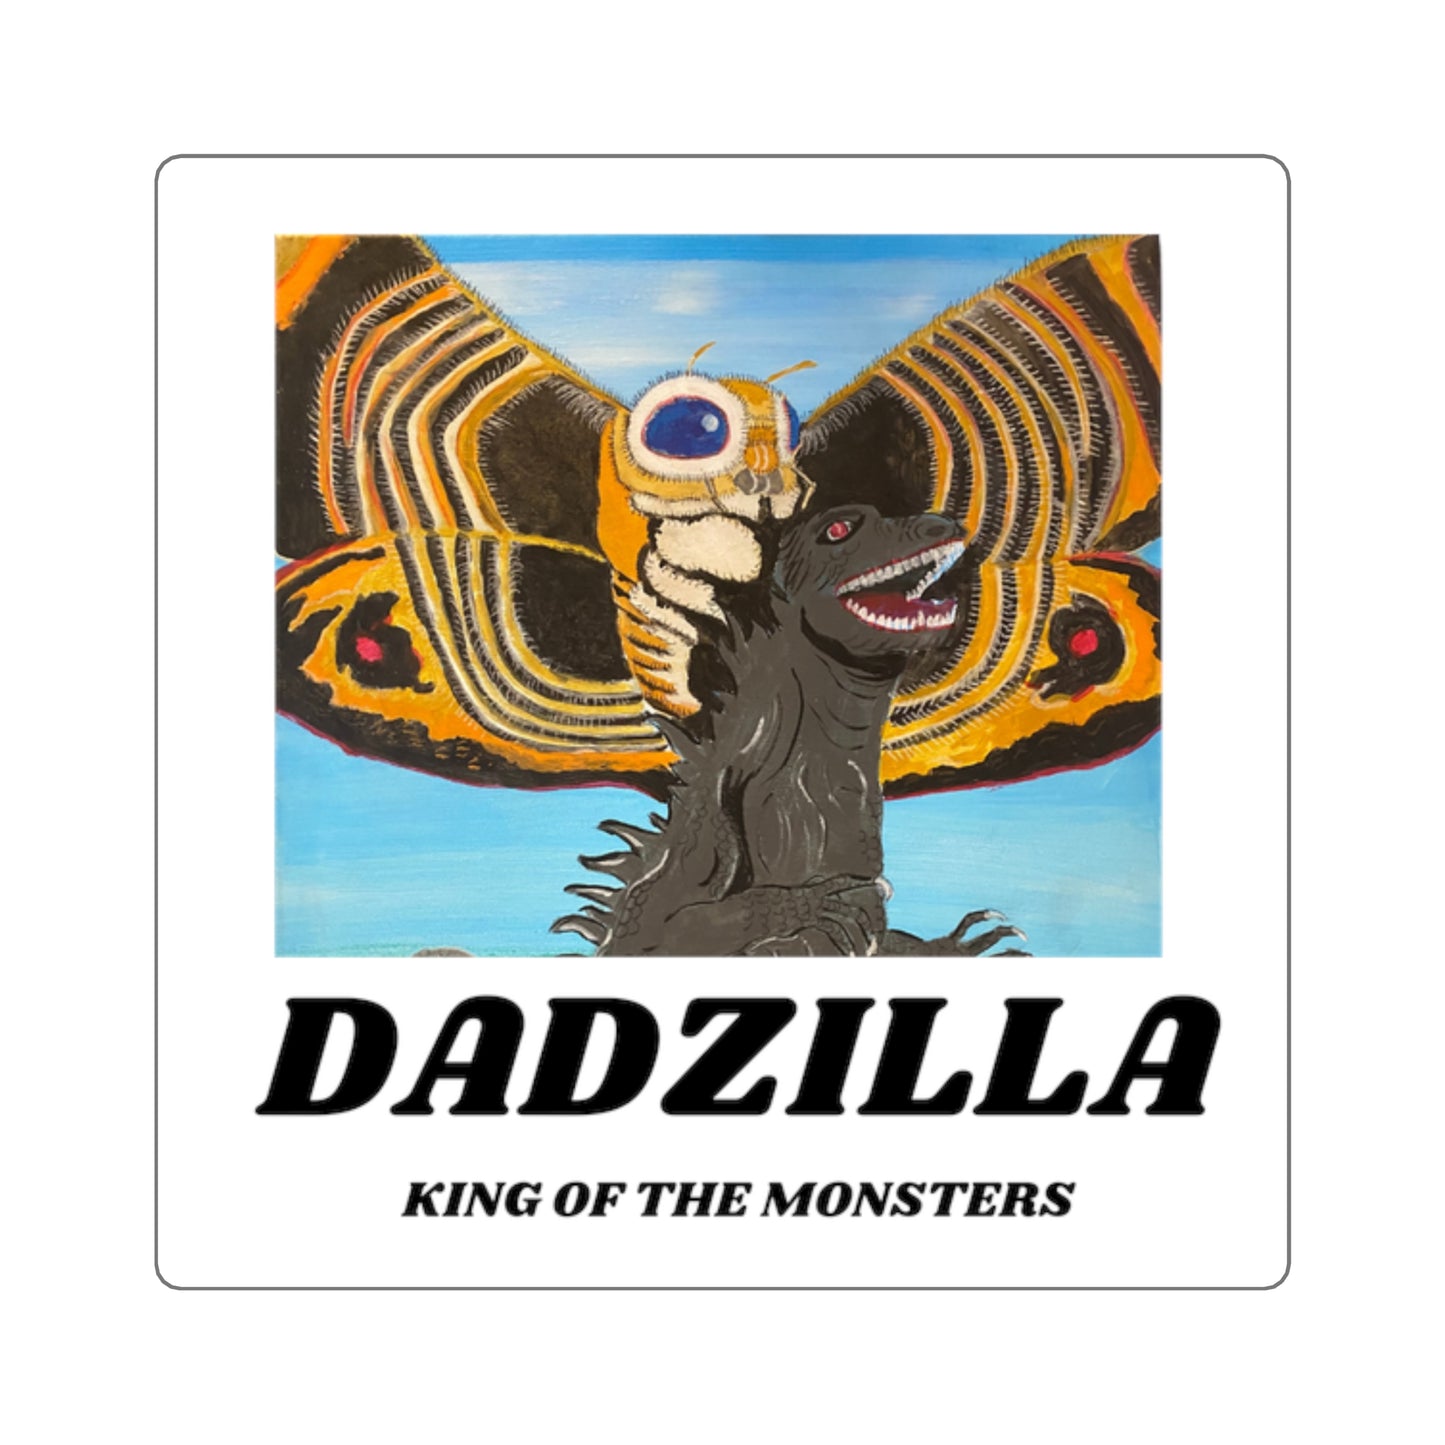 DADZILLA King Of the Monsters/Square Stickers